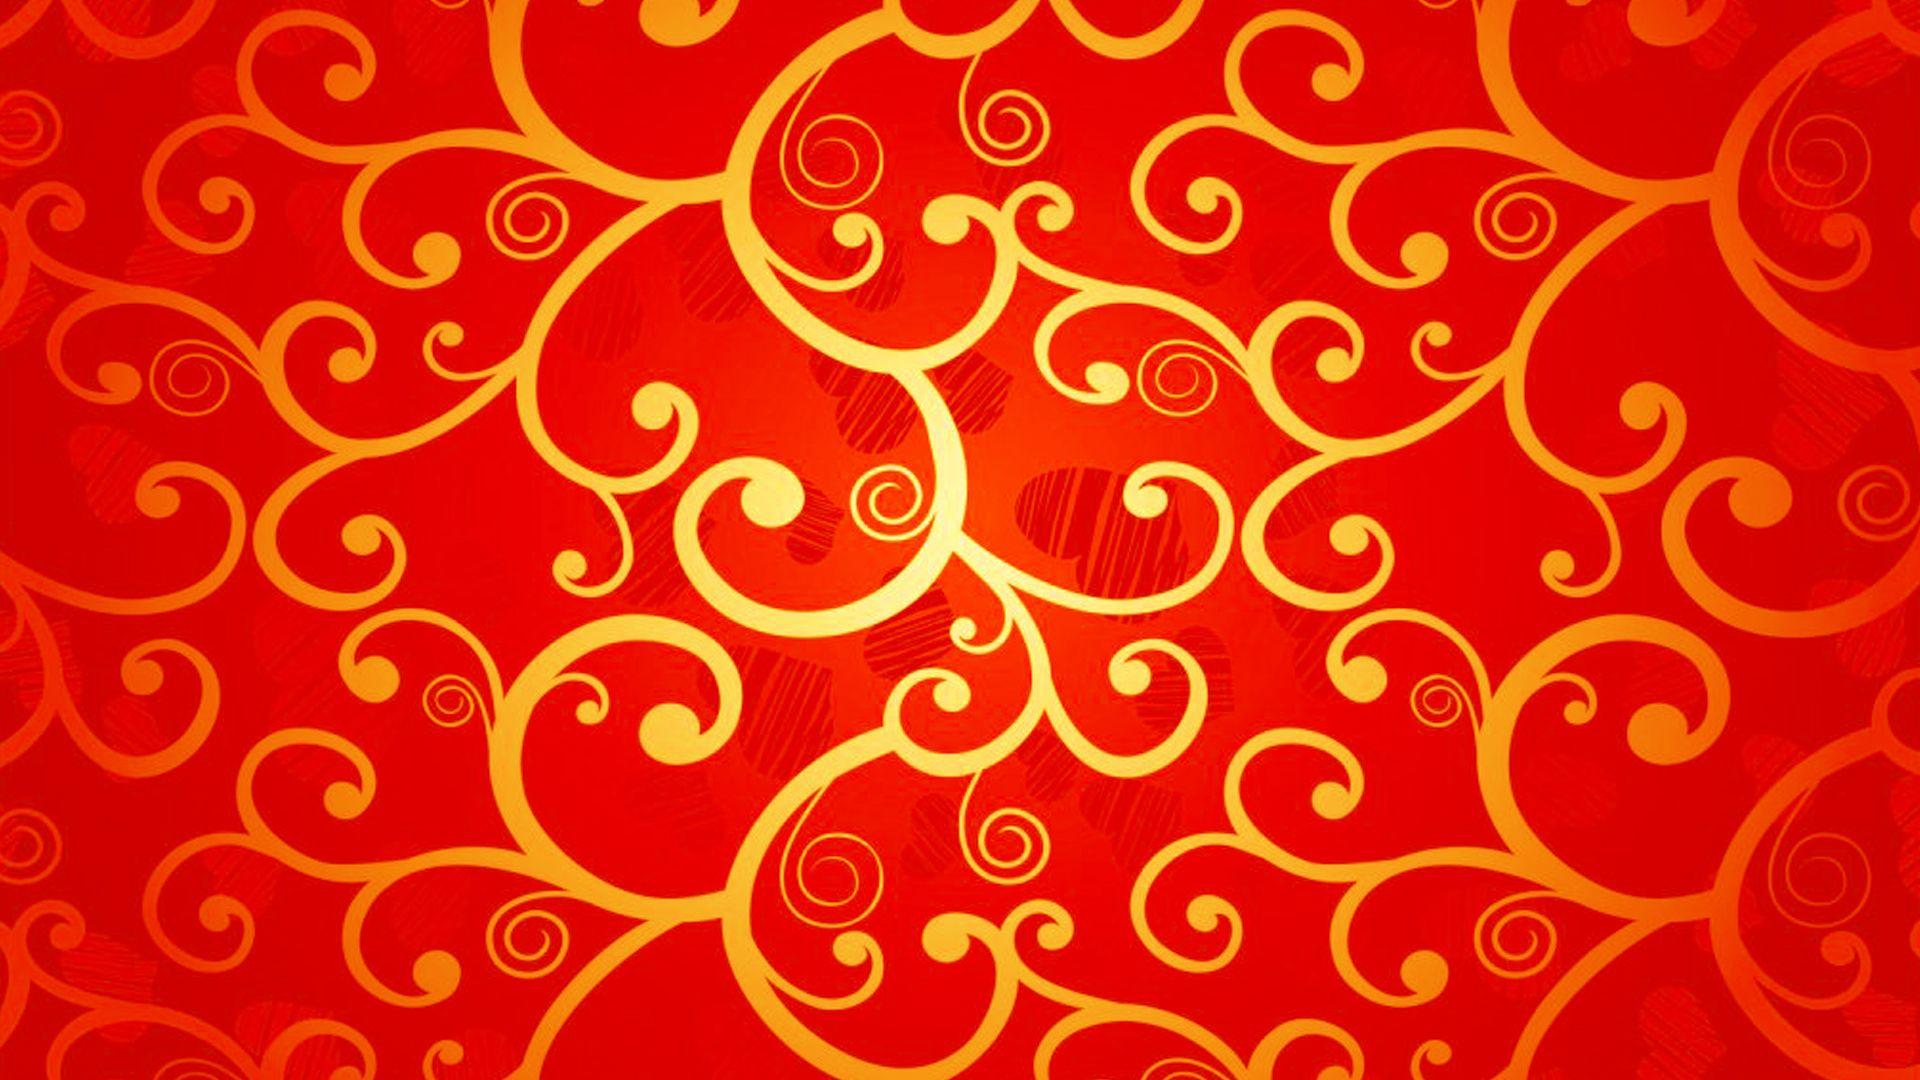 Red Chinese Wallpaper Designs 15 of 20 with Gold Floral Pattern. HD